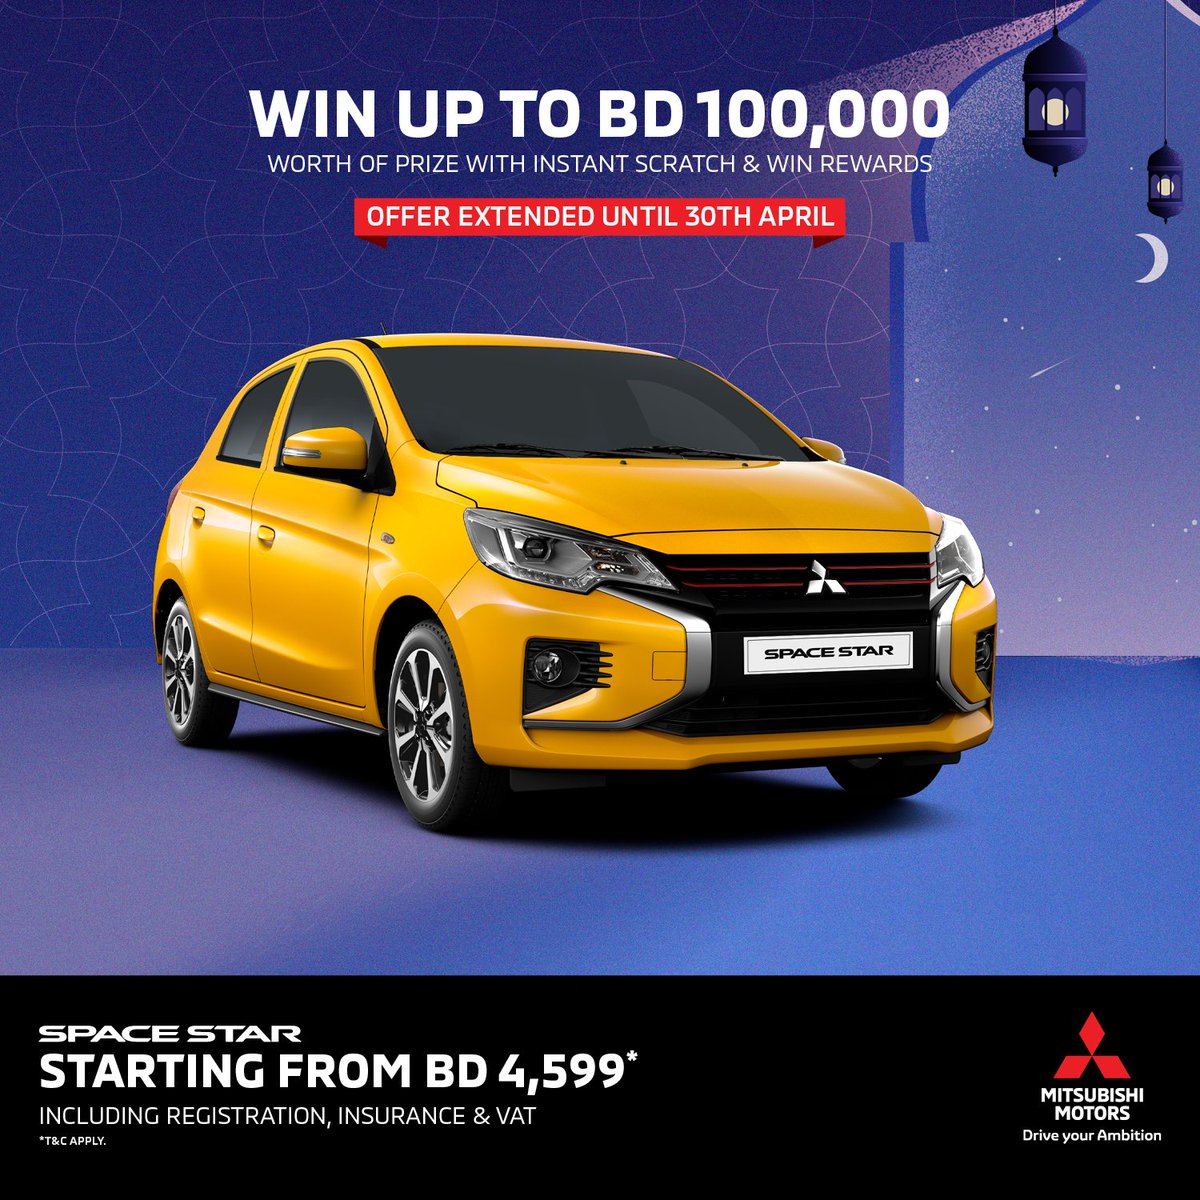 Explore thrilling performance with Mitsubishi's offers. Stand a chance to win prizes worth up to BD 100,000 with an instant scratch card.
*Terms & Conditions Apply.

#Rewards #ZayaniMotors #MitsubishiMotors #Bahrain #البحرين